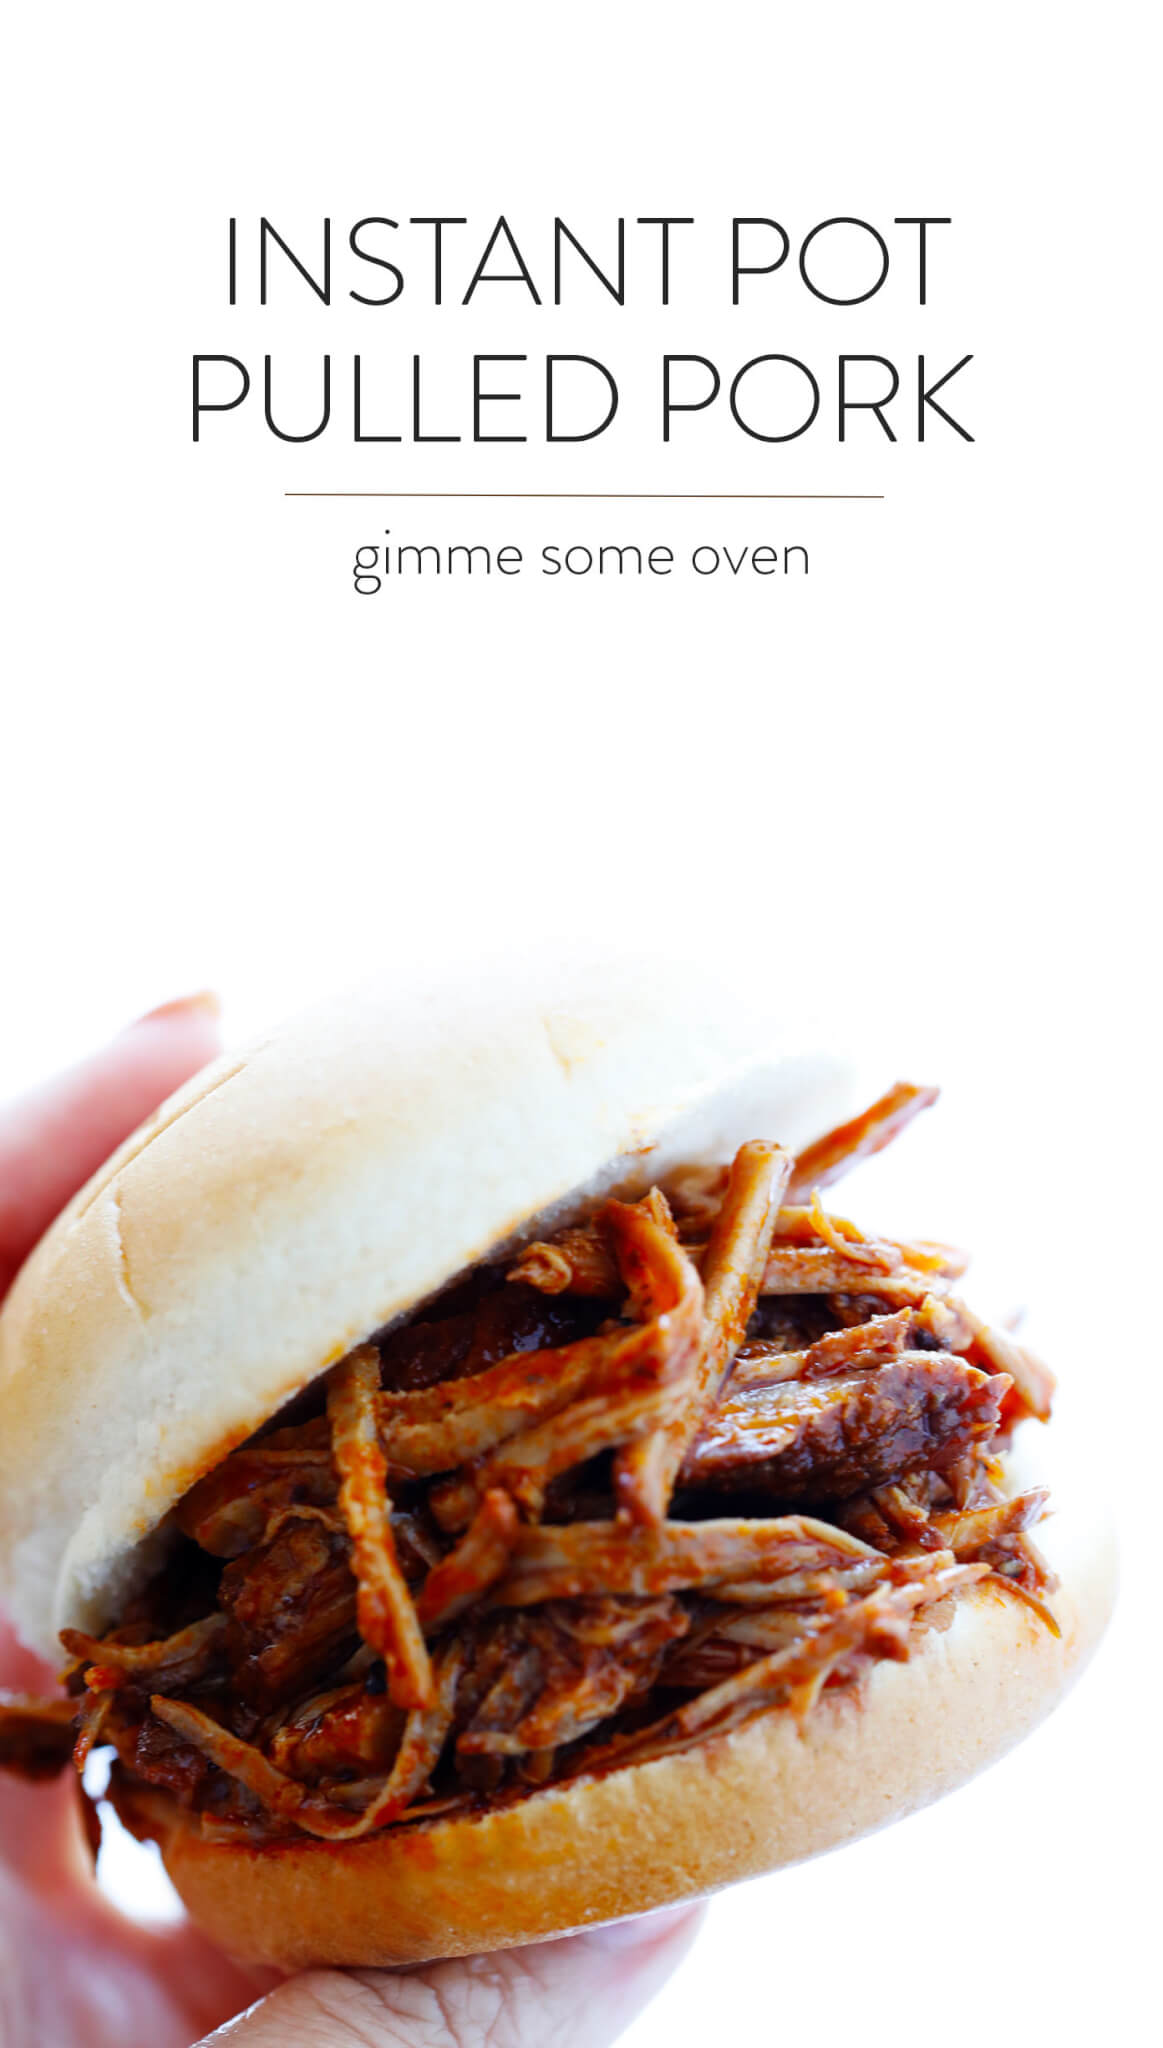 The most tender, juicy and delicious BBQ Pulled Pork -- made extra easy in the Instant Pot pressure cooker! Use your favorite BBQ sauce and serve this up on sandwiches or whatever sounds good. | gimmesomeoven.com